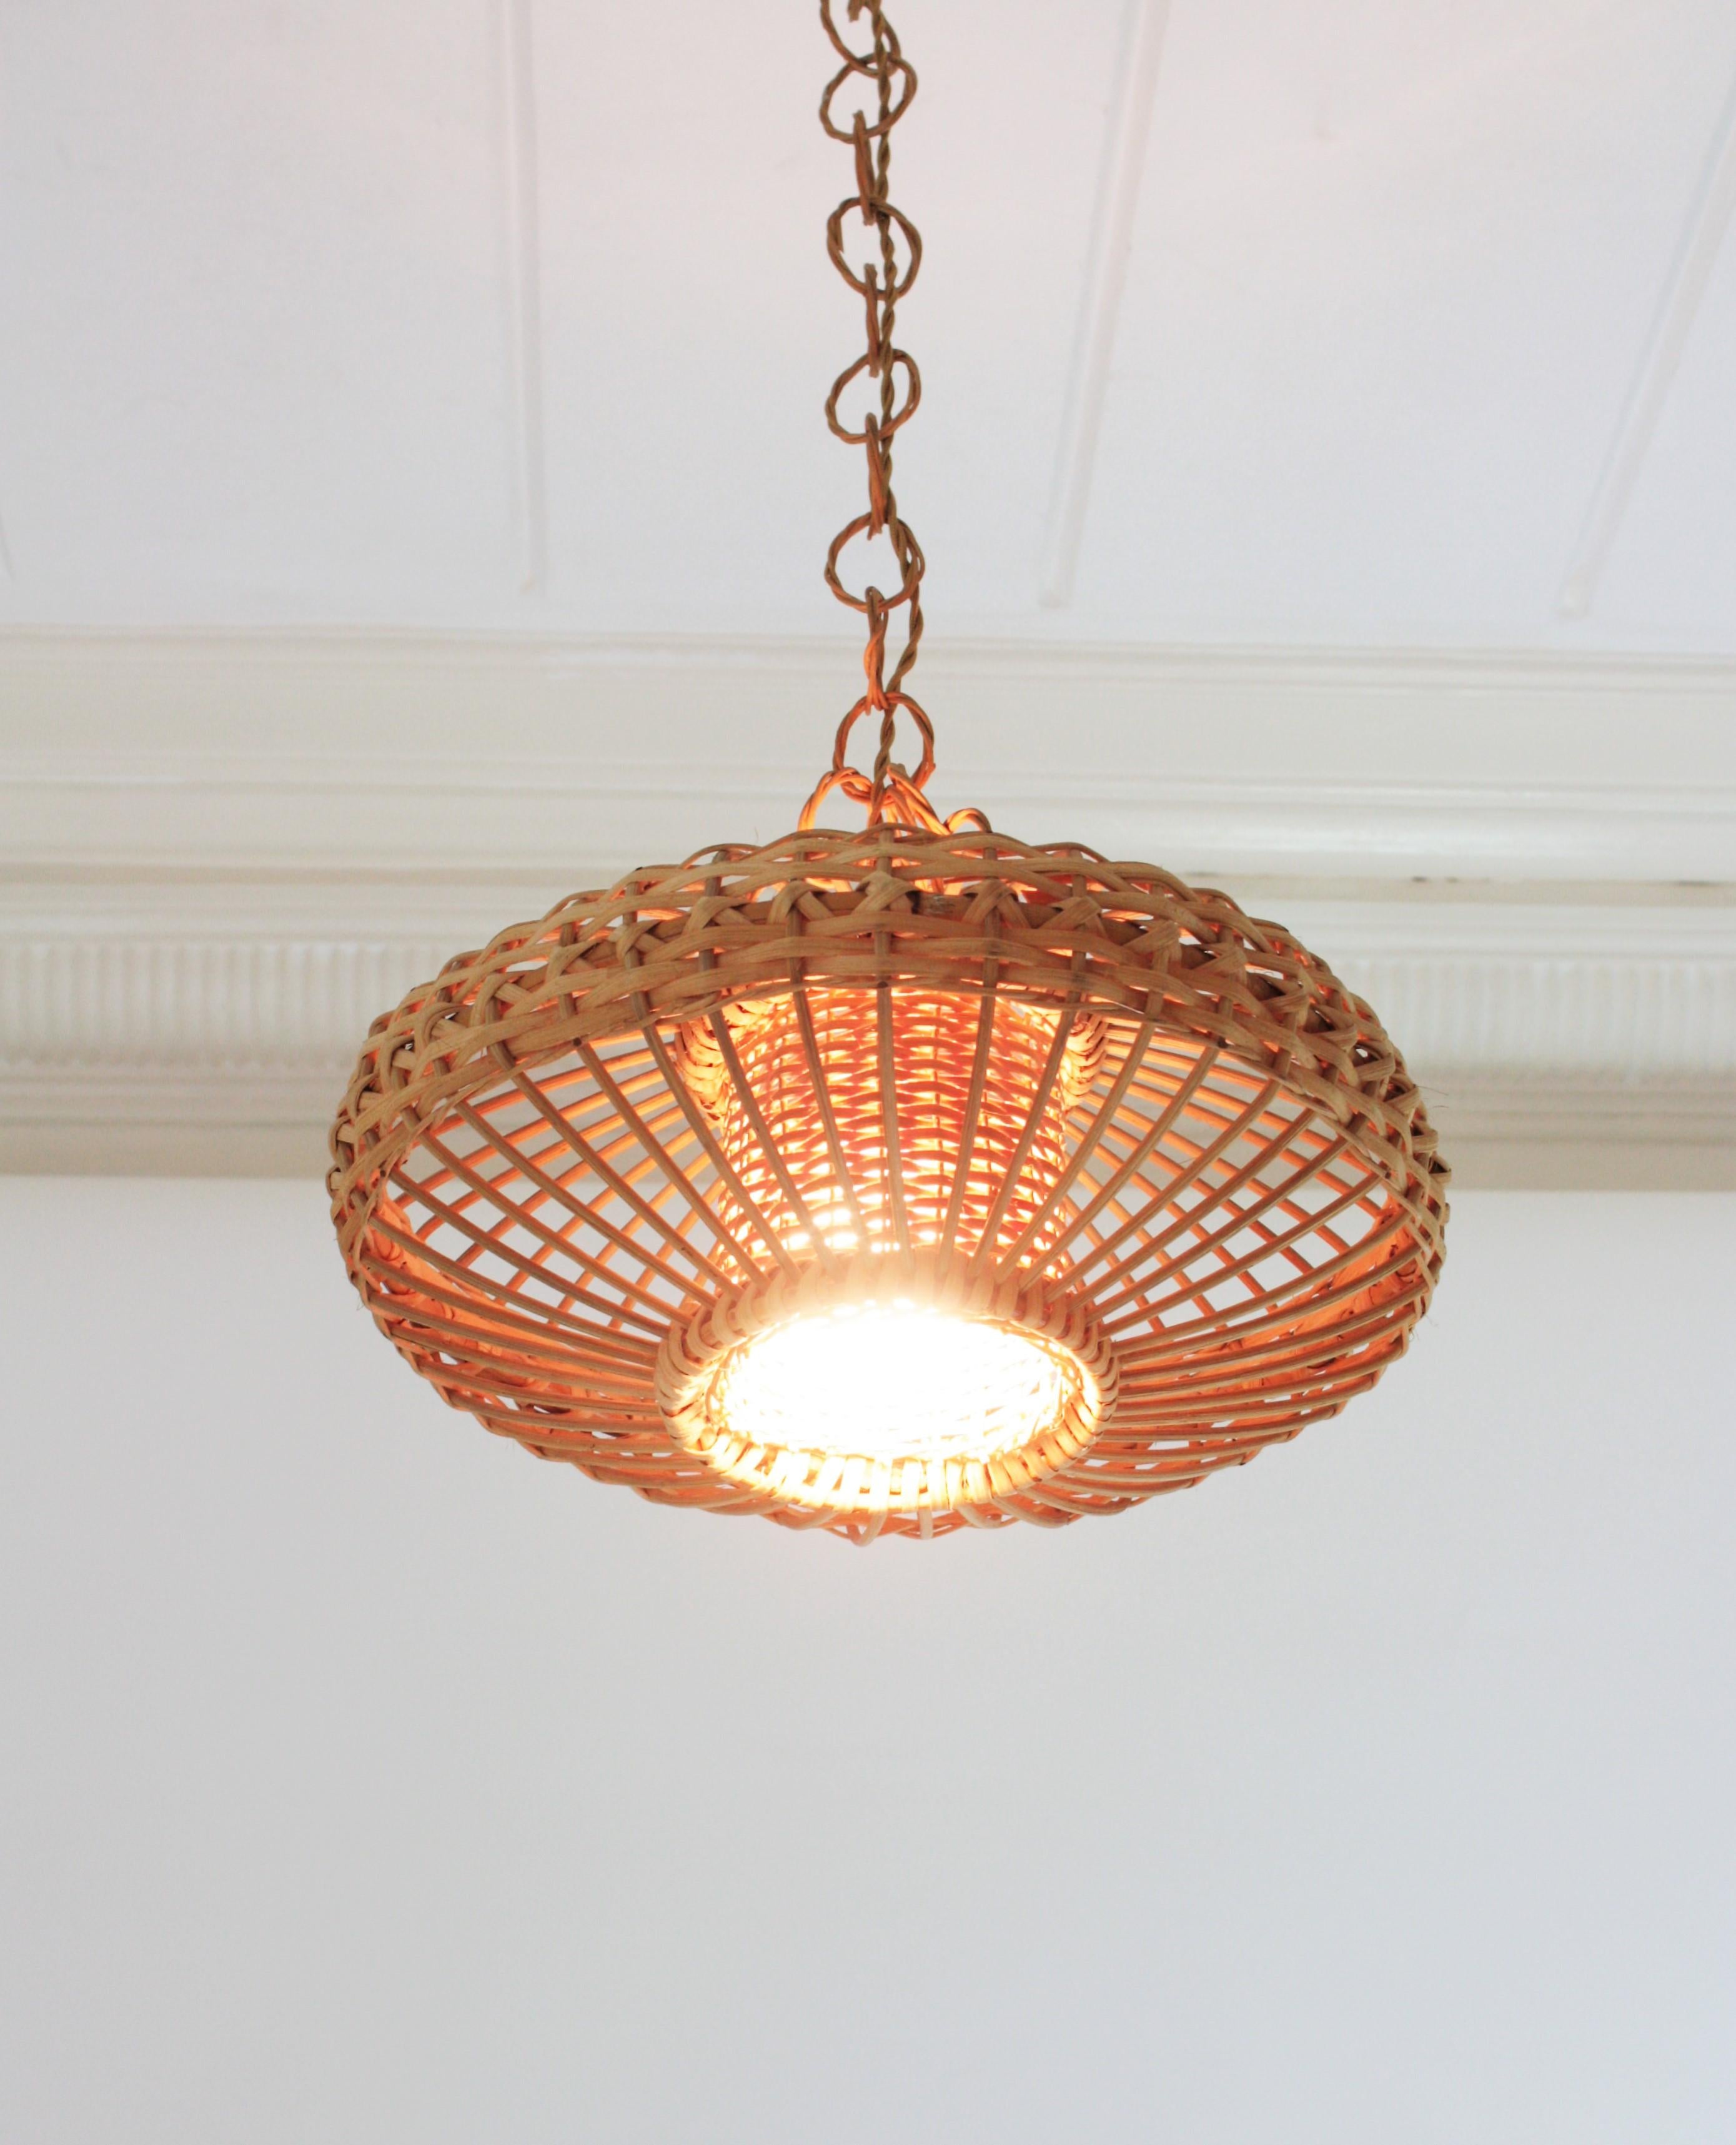 Hand-Crafted Spanish Hand Woven Rattan Wicker Pendant Light / Lantern For Sale